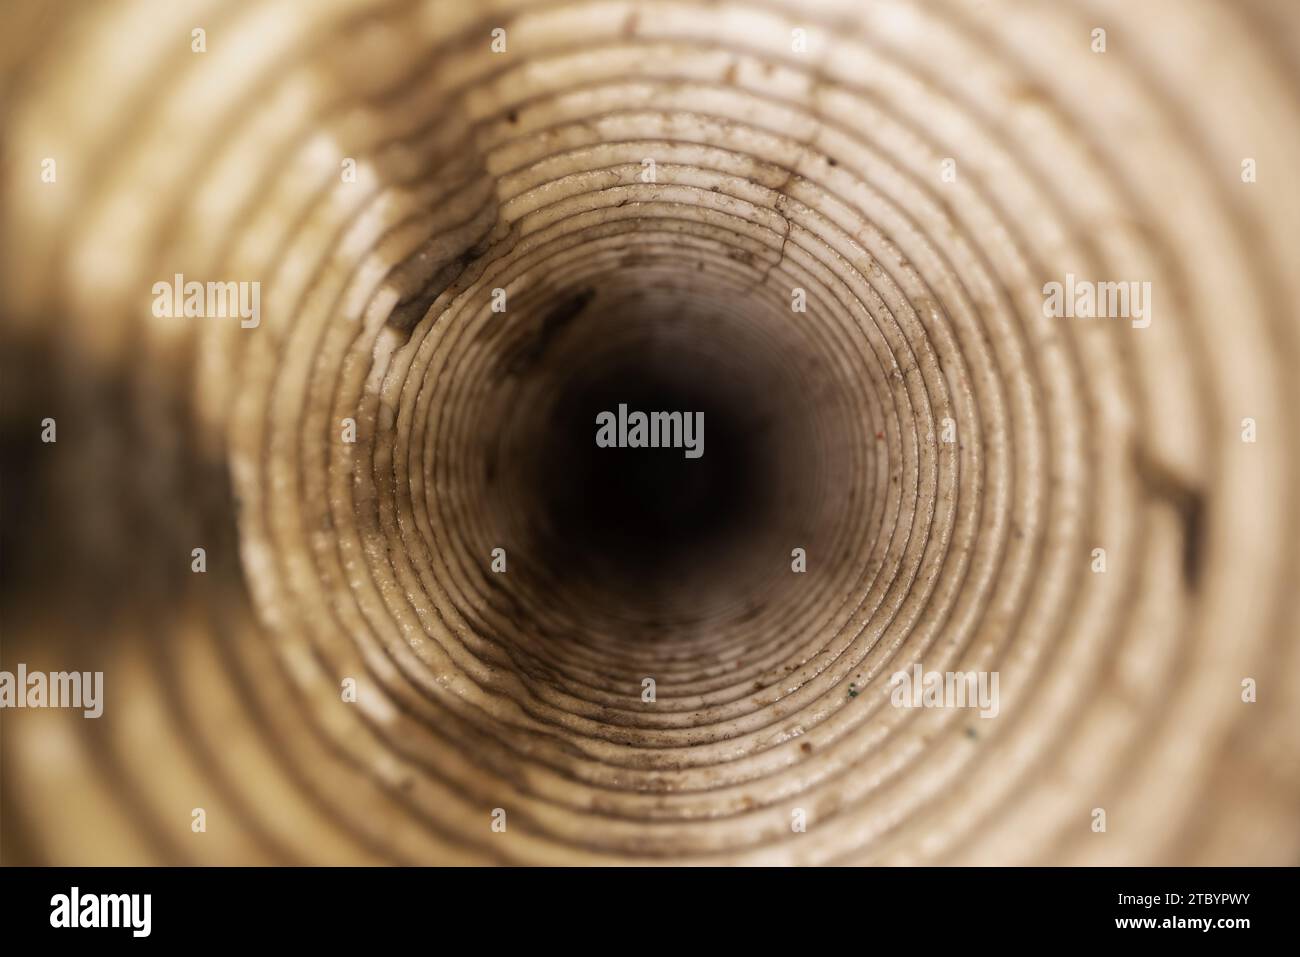 inside view of dirty corrugated drainage pipe Stock Photo